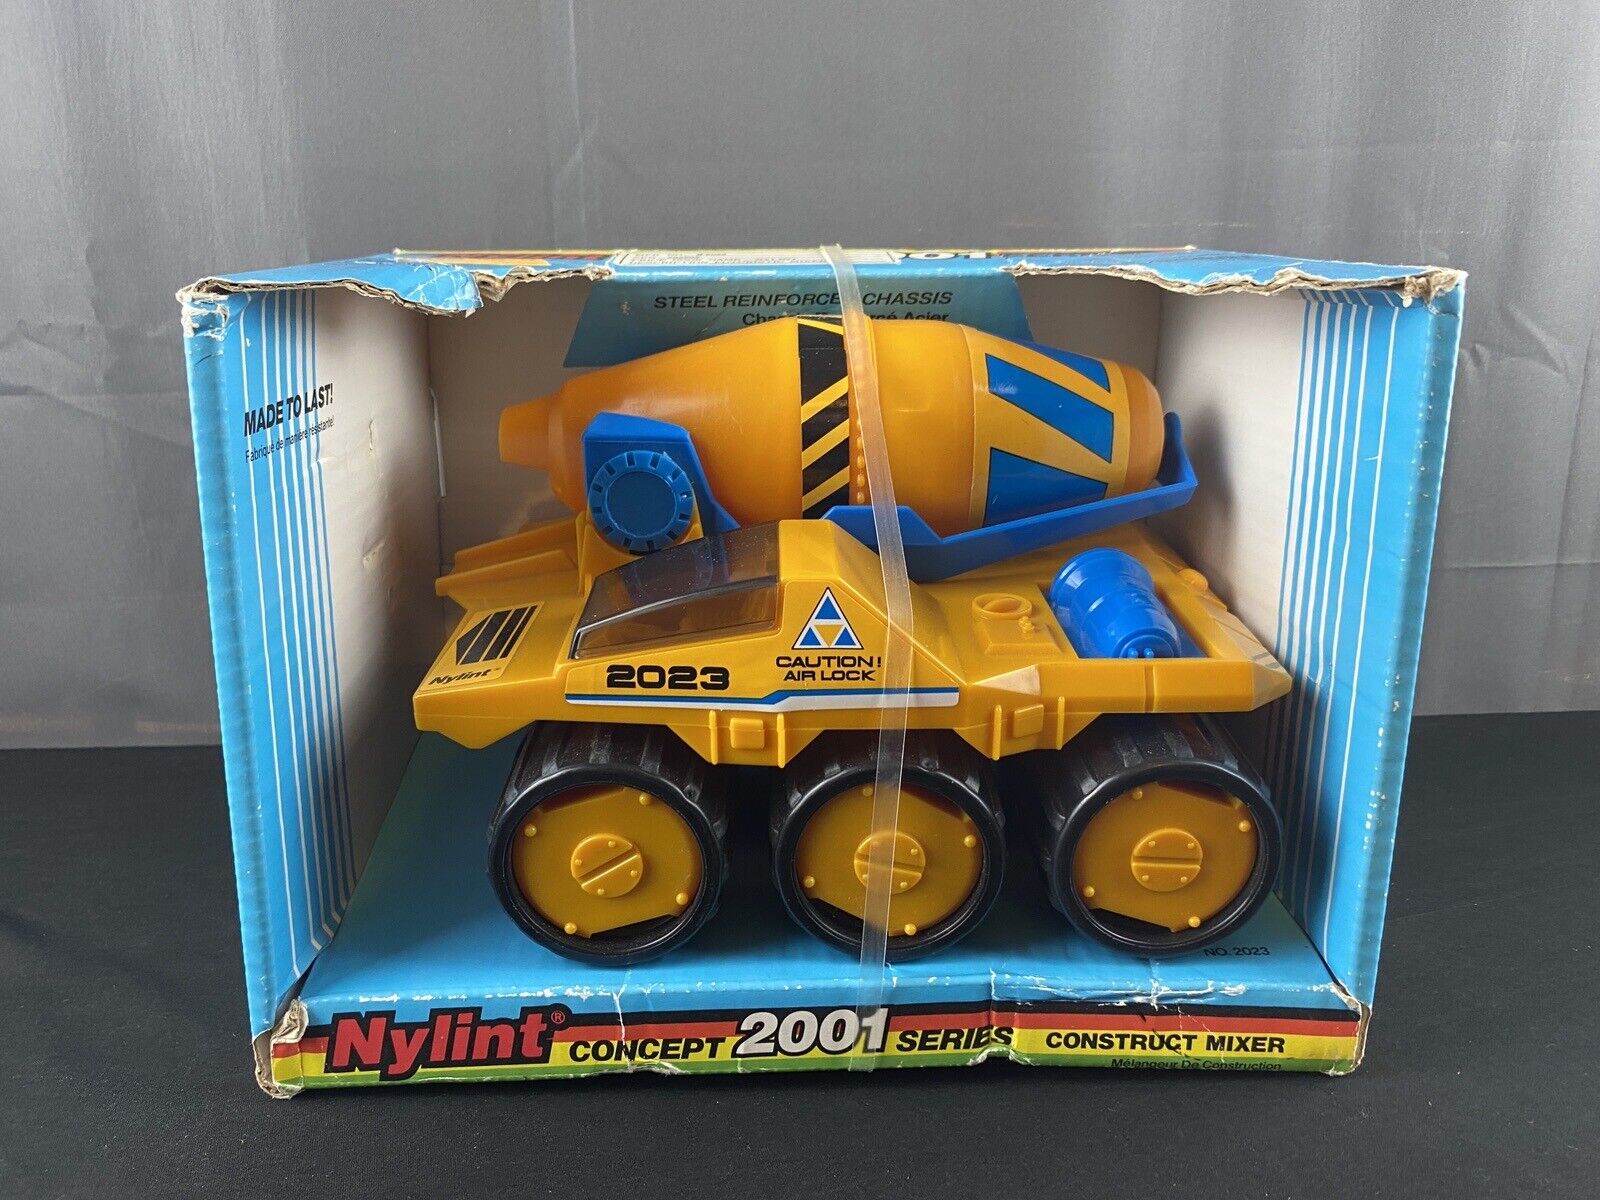 Vintage Nylint Concept 2001 Series Construct Mixer No. 2023 Toys R Us